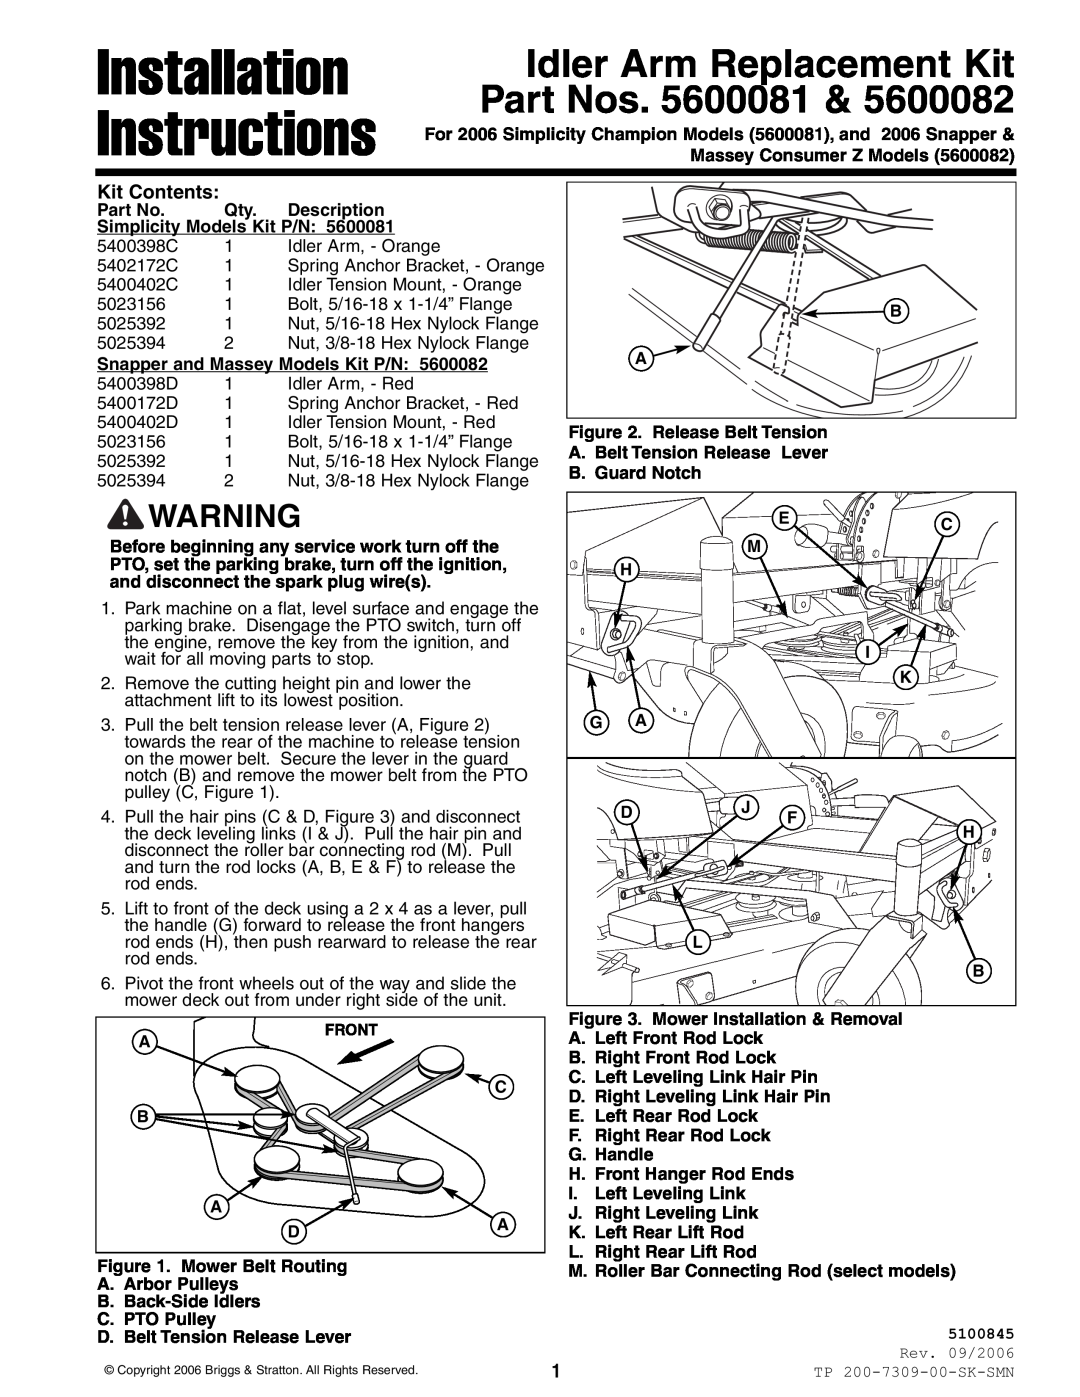 Simplicity 5600081 installation instructions Installation Instructions, Idler Arm Replacement Kit Part Nos, Kit Contents 